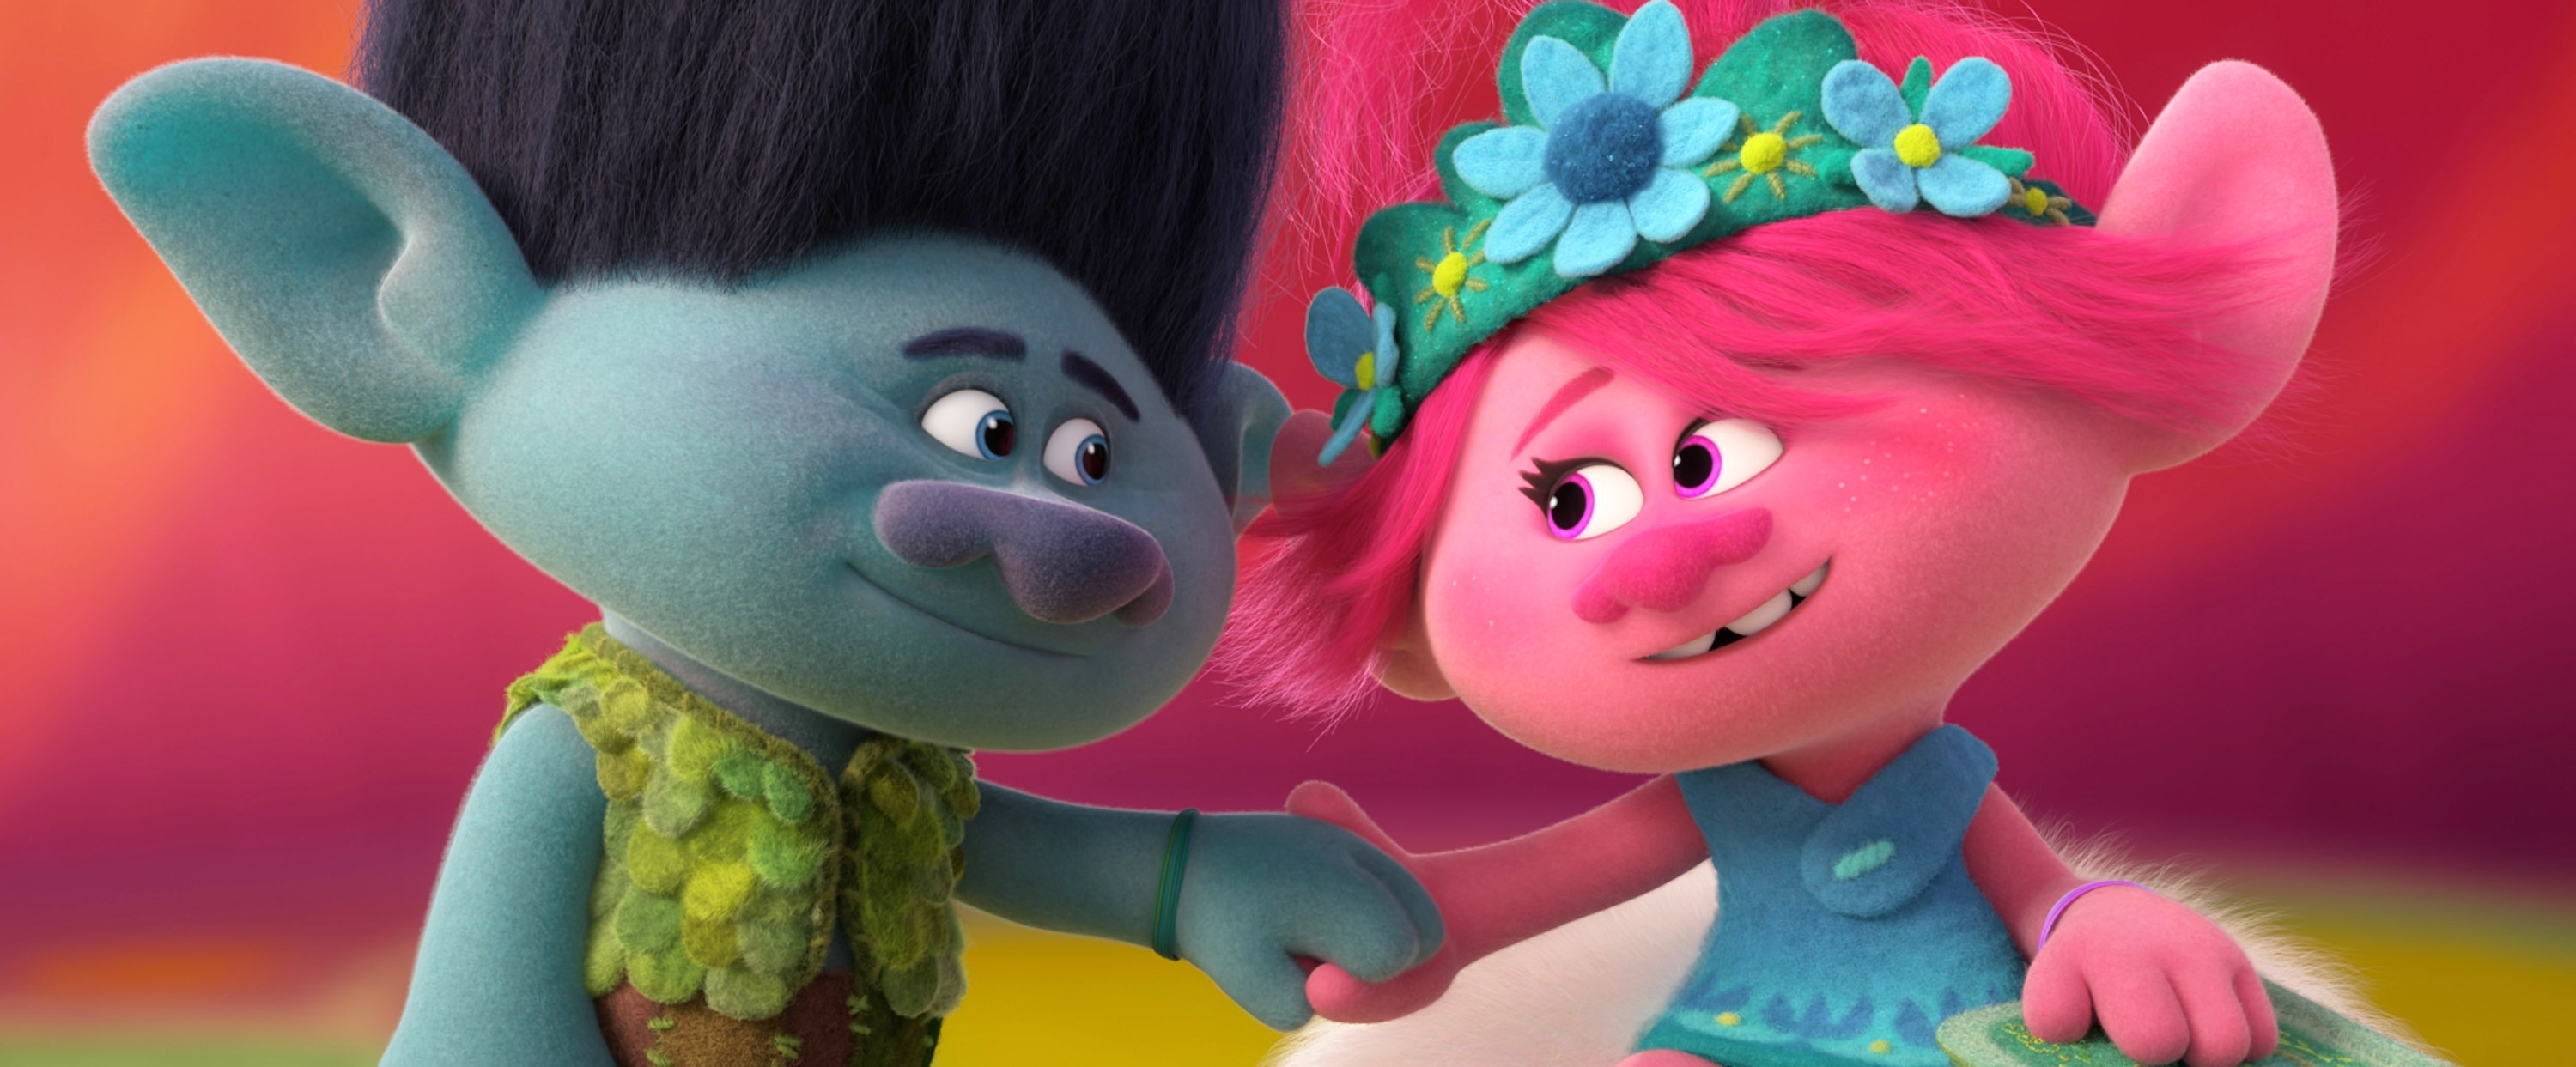 Branch and Poppy from Trolls, smiling, shaking hands, adorned with floral accessories